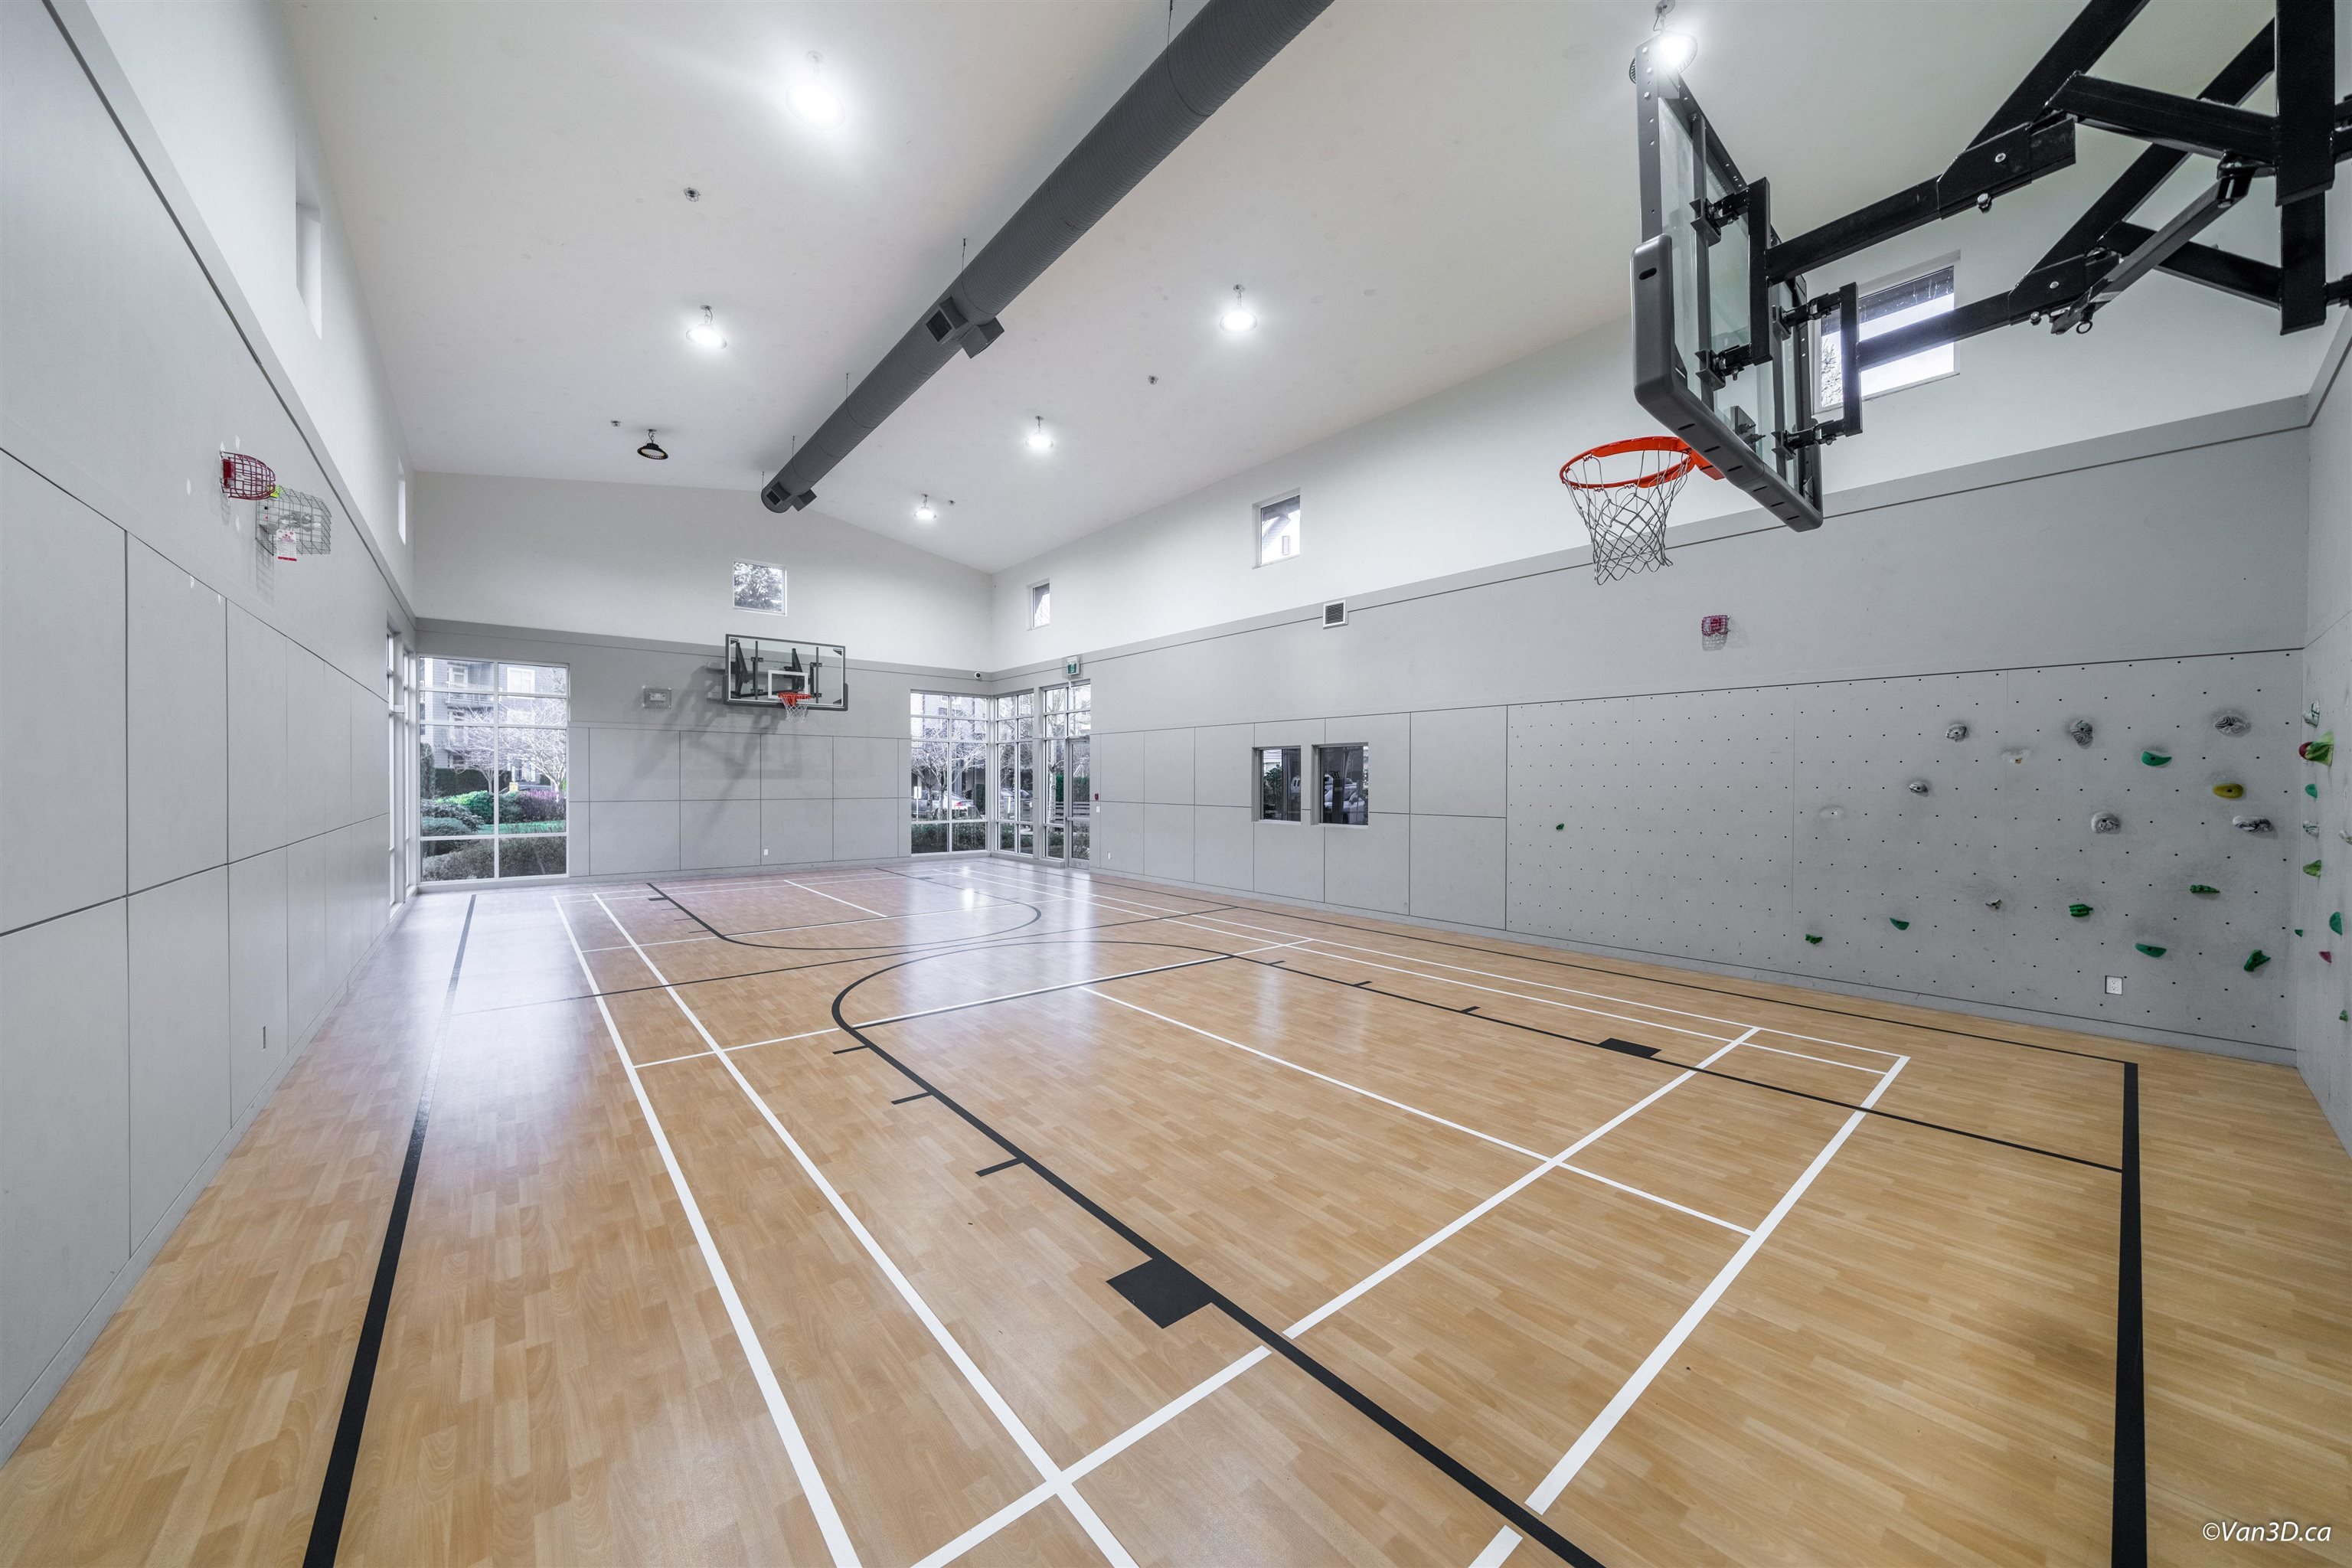 Great amenities - Clubhouse with sports court and gym